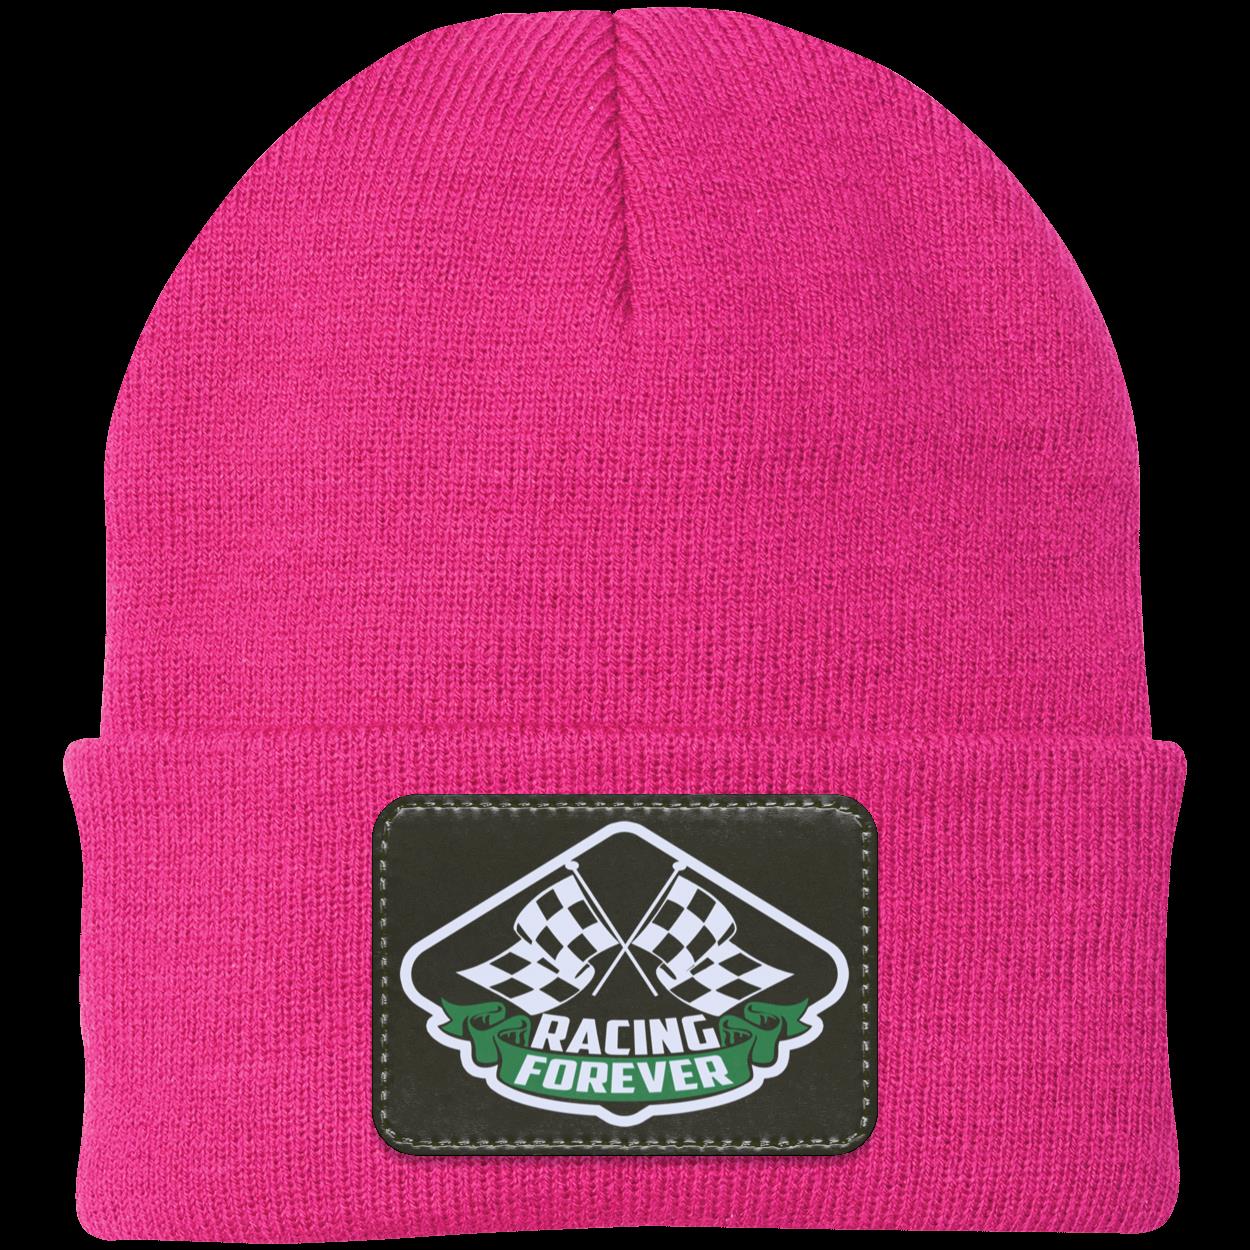 Racing Forever Patched Knit Cap V1